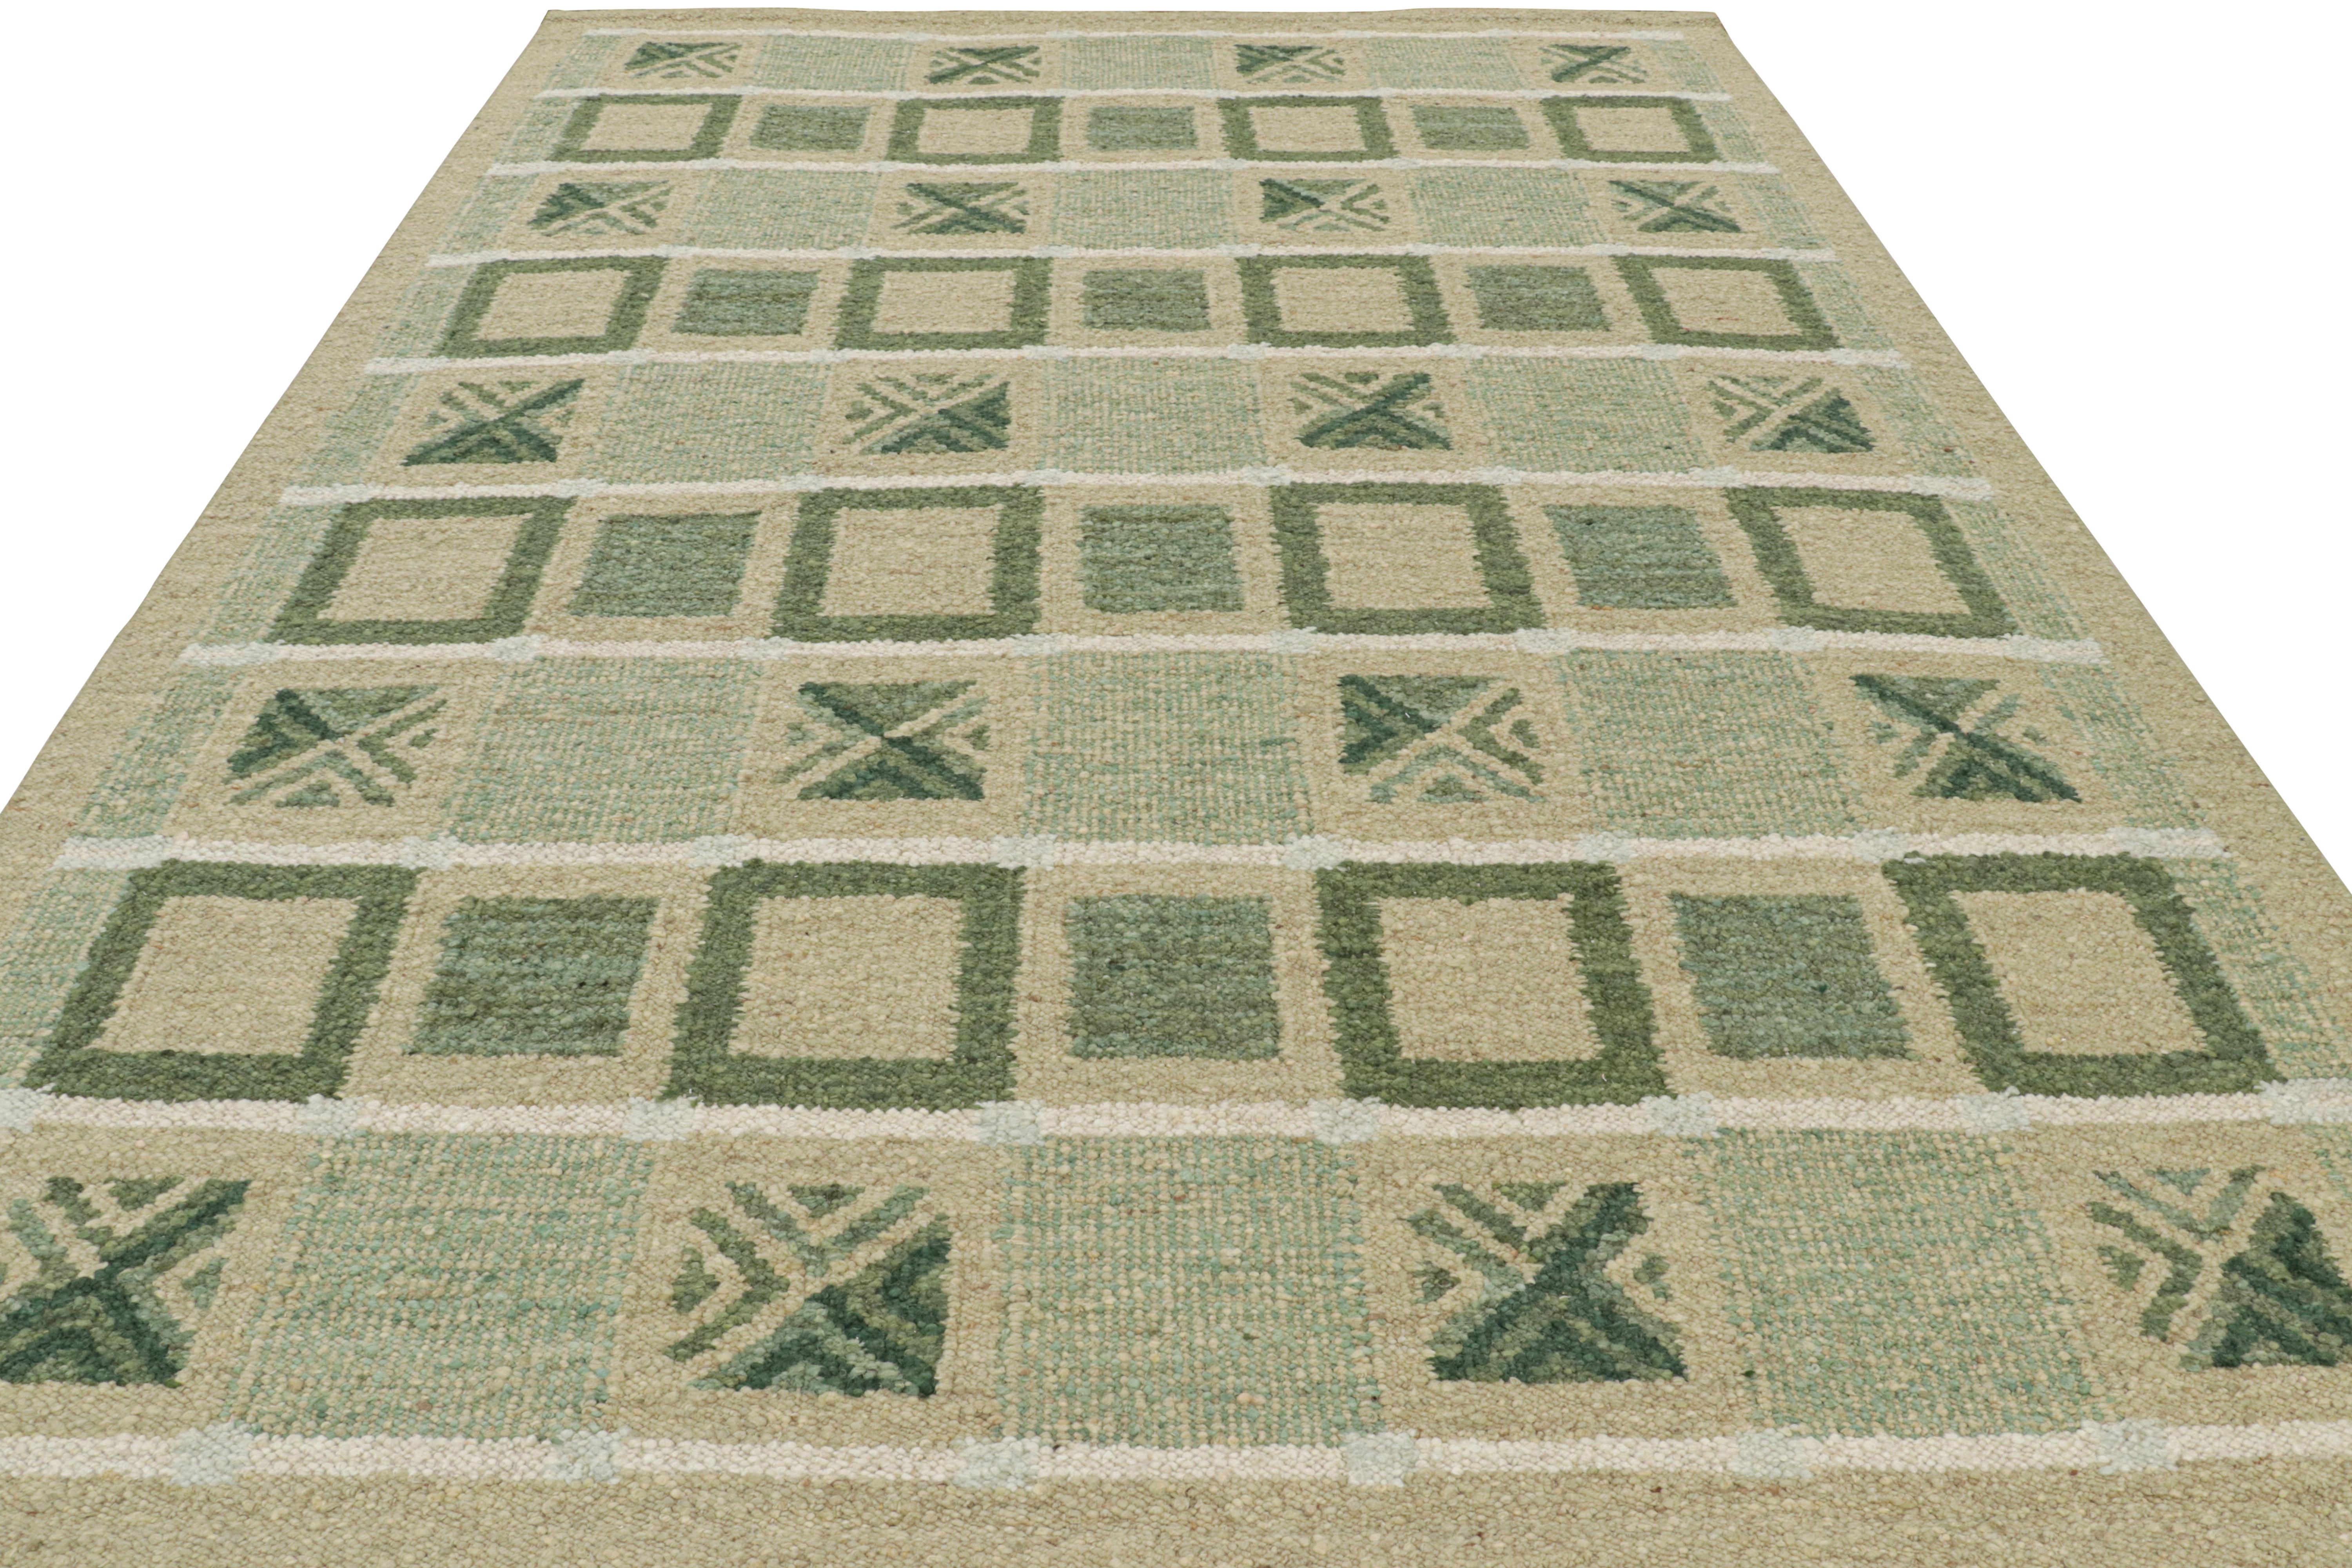 Hand-Woven Rug & Kilim’s Scandinavian Style Rug with Green, Beige-Brown Geometric Patterns For Sale